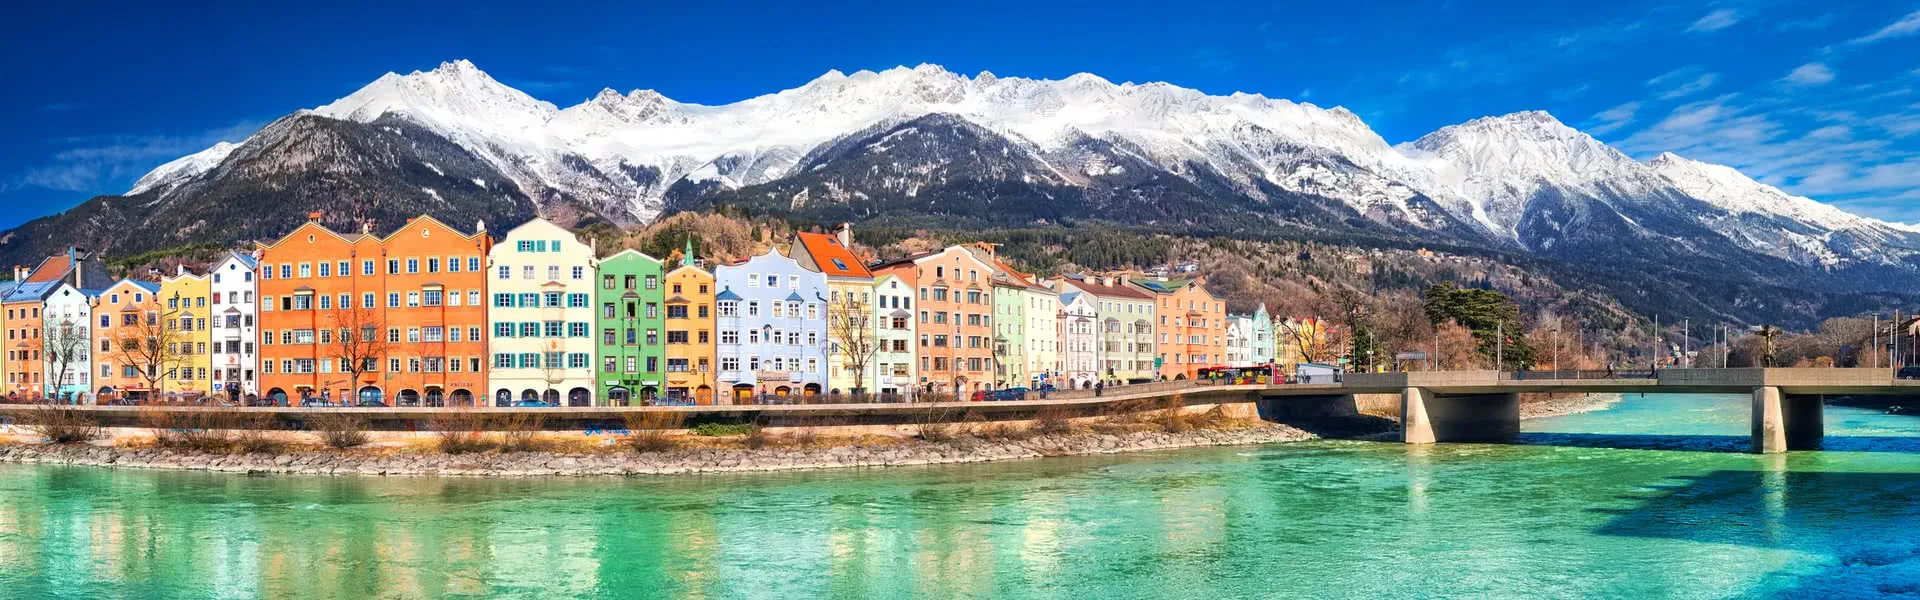 Innsbruck - the destination with youth hostels